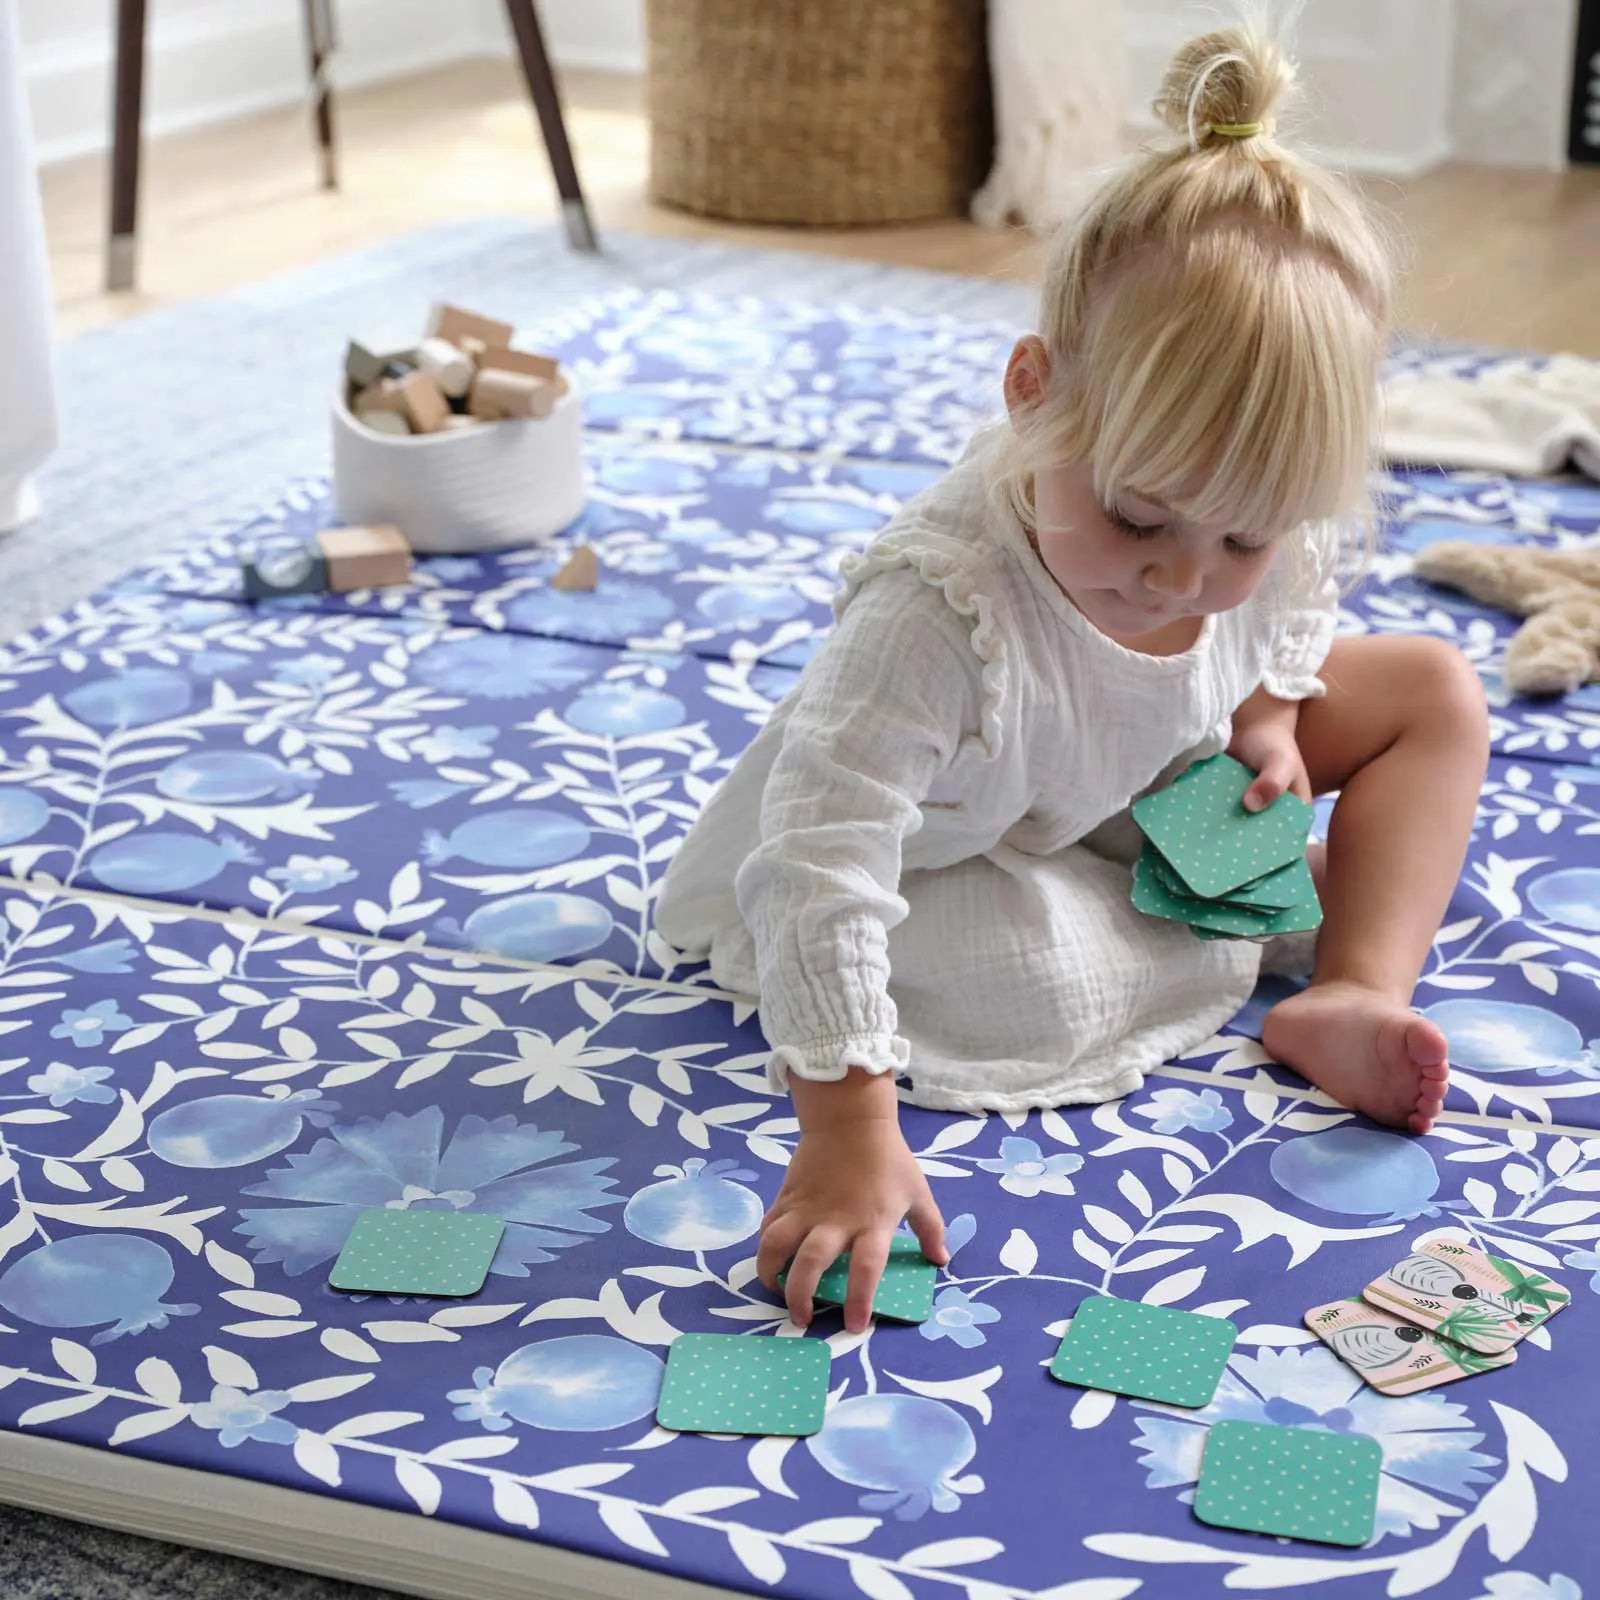 Deep sea blue and white floral tumbling mat with toddler girl sitting on the mat playing a memory card game with basket of blocks and plush toys on the mat in the background